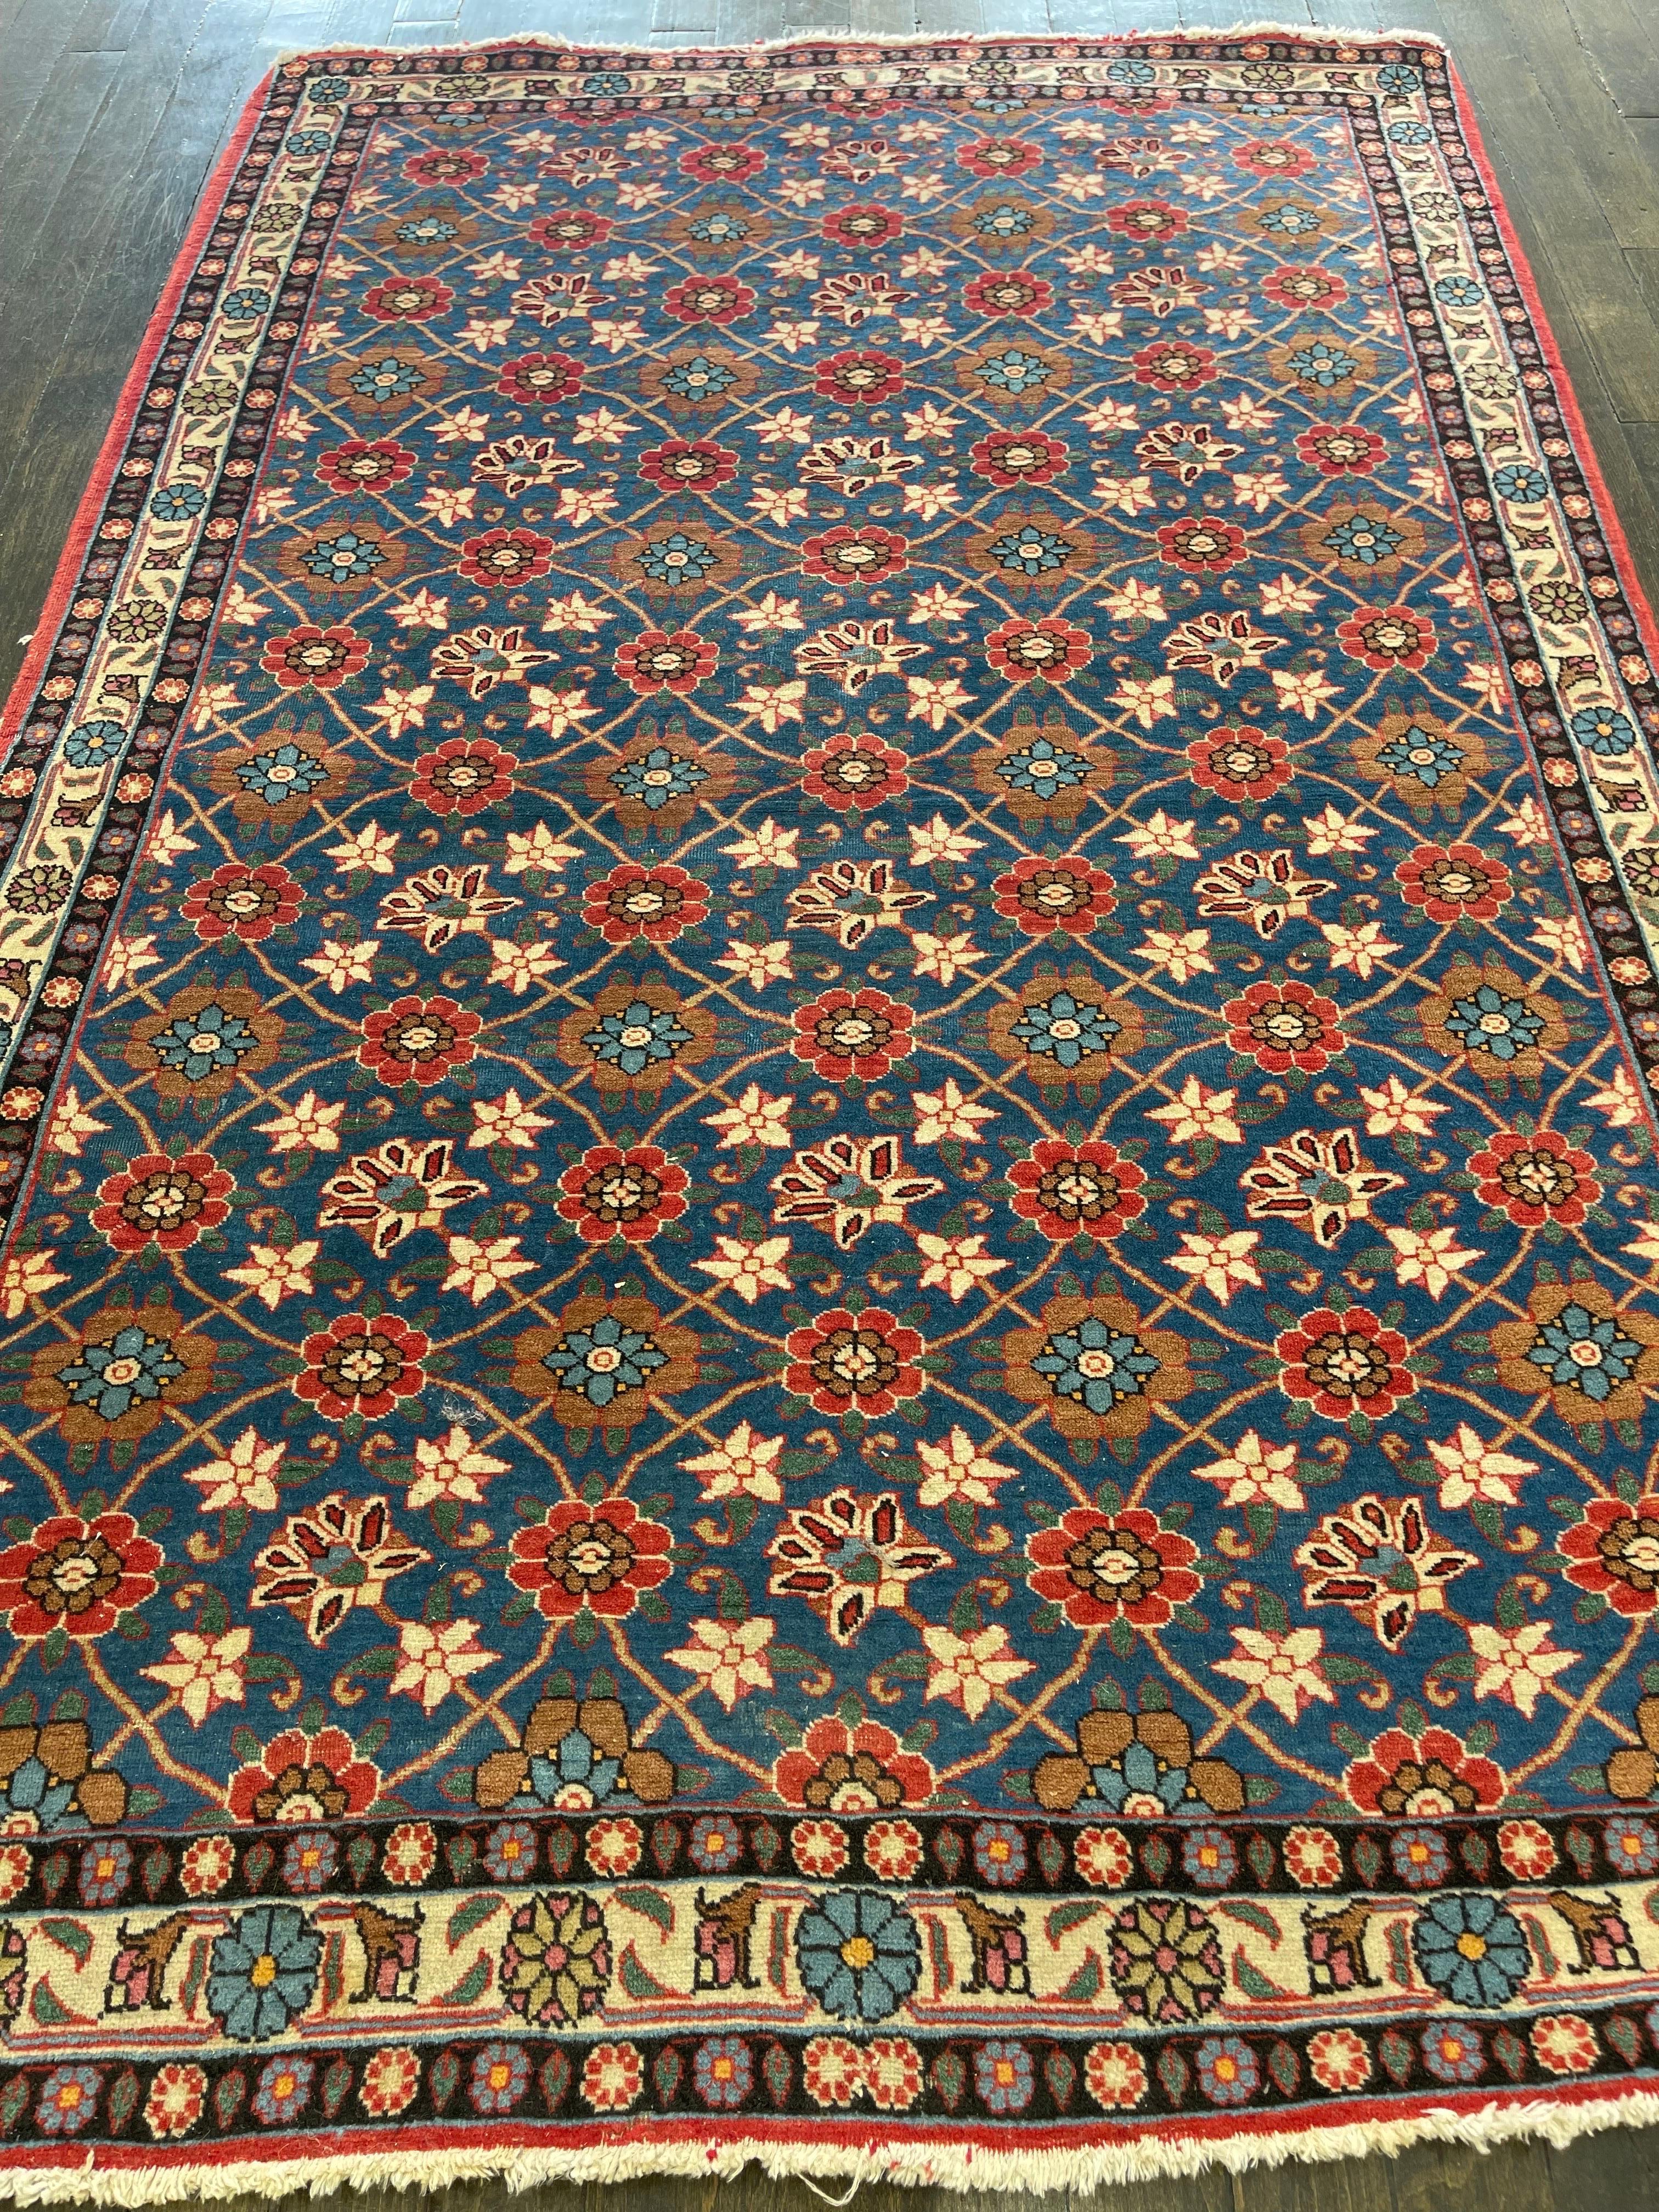 A gem created in Iran's central north, this rug features the renowned Mina Khani design, on a light blue field with ivory border and two guard borders all decorated with small Rossetts.

The 